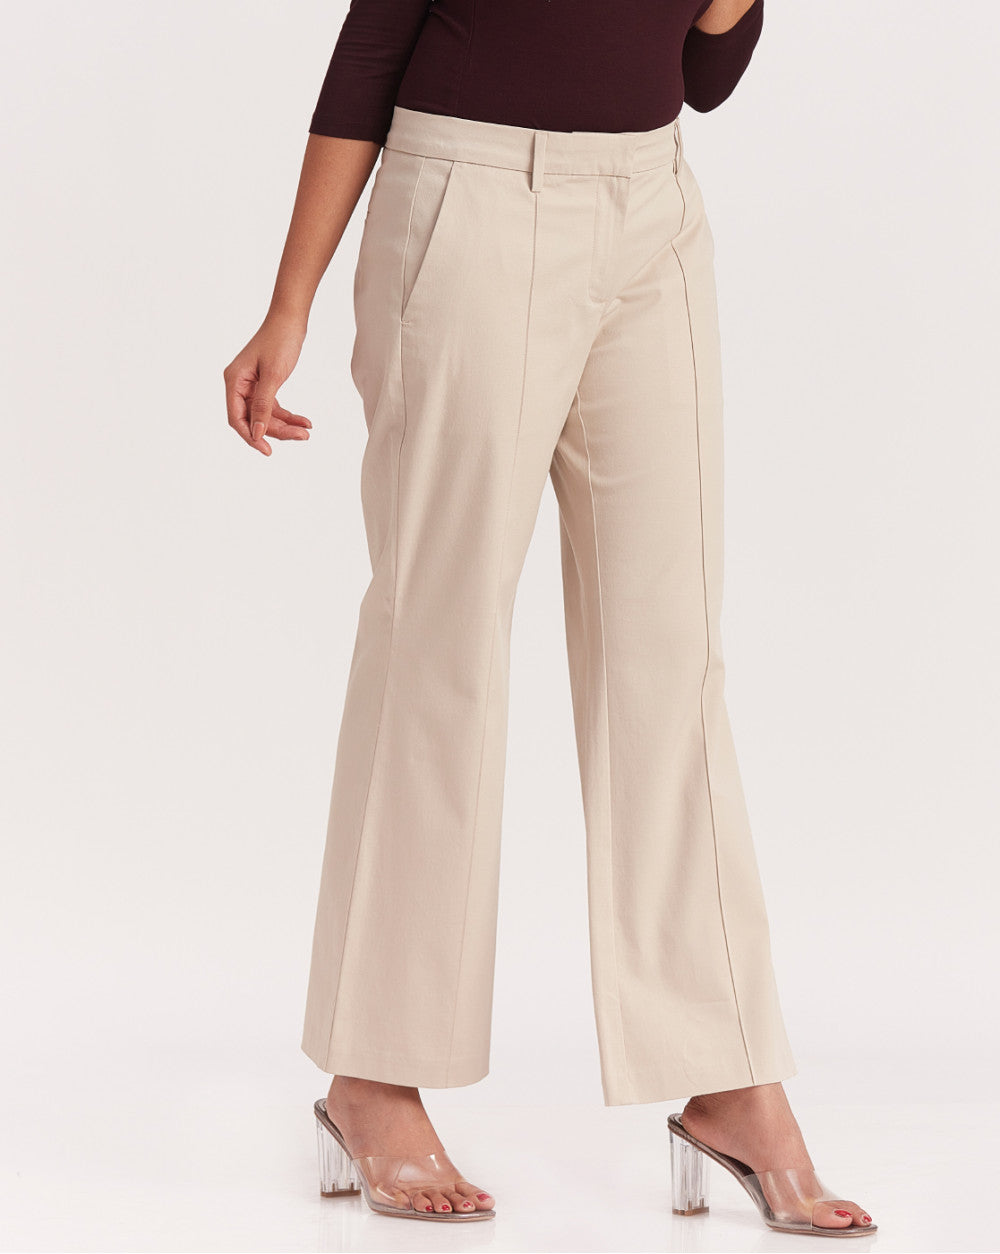 Fit And Flare Flare Mid Waist Smart Pants - Wheat